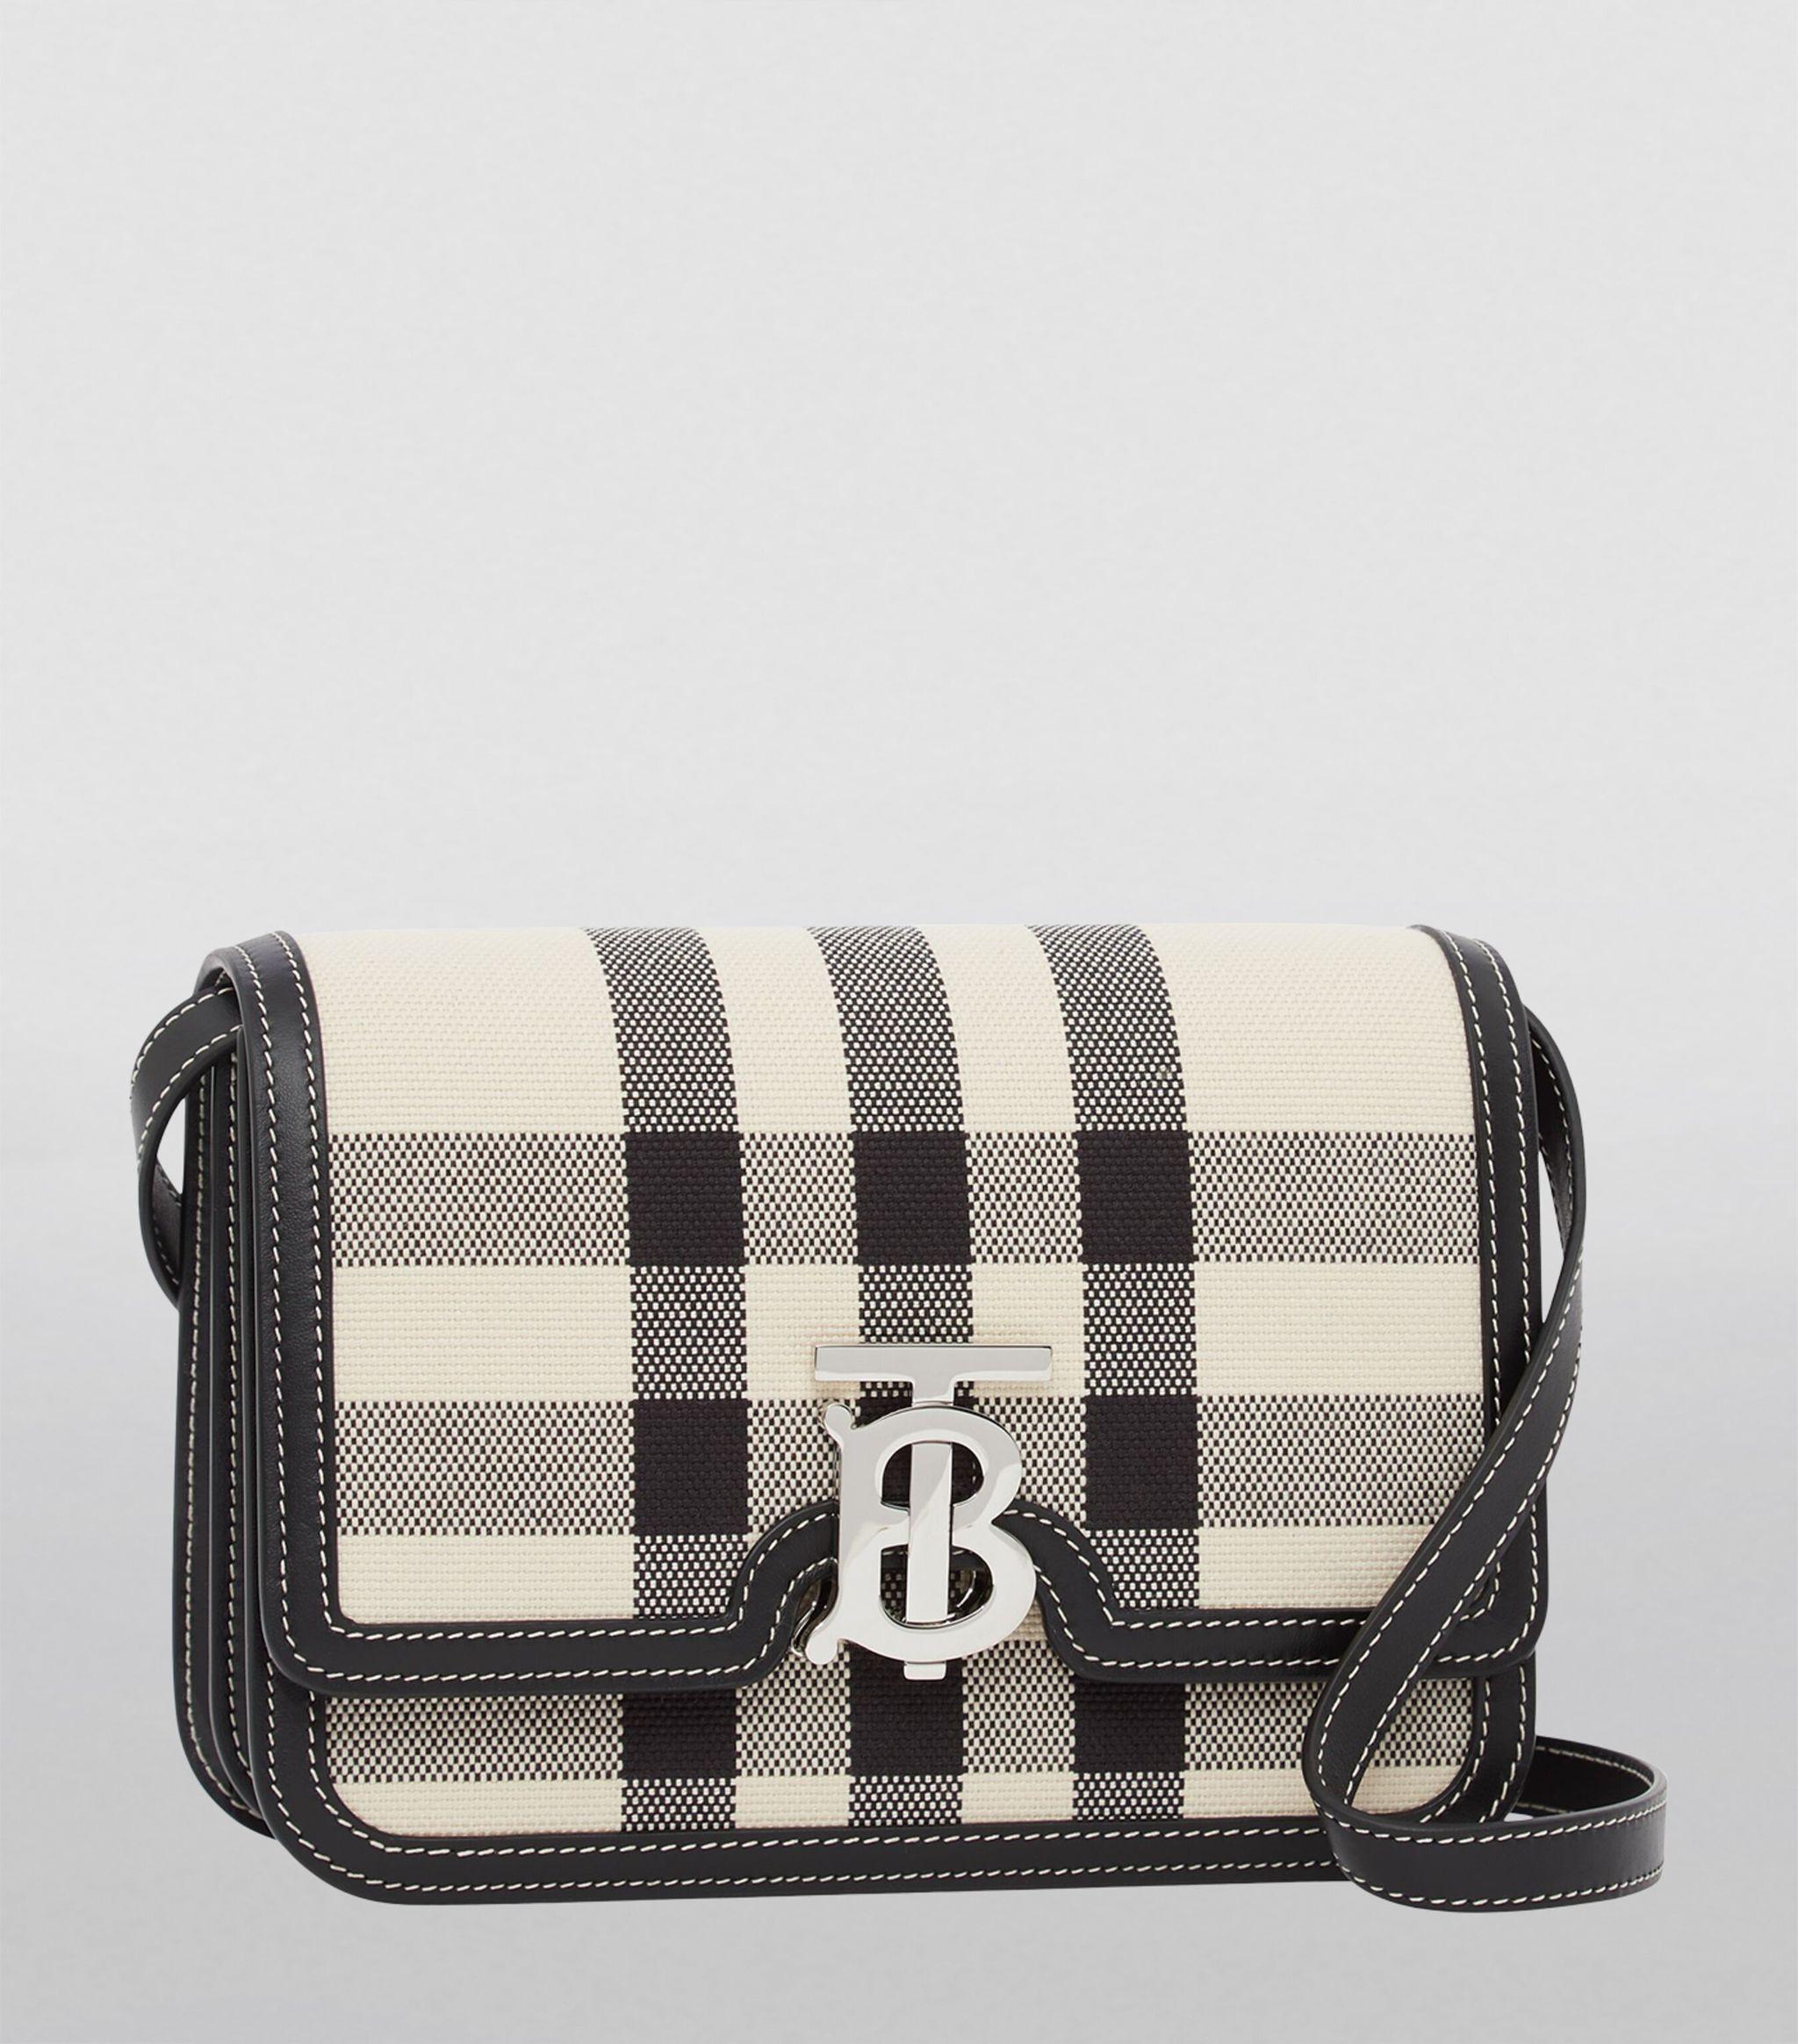 BURBERRY: TB bag in canvas and leather - Beige